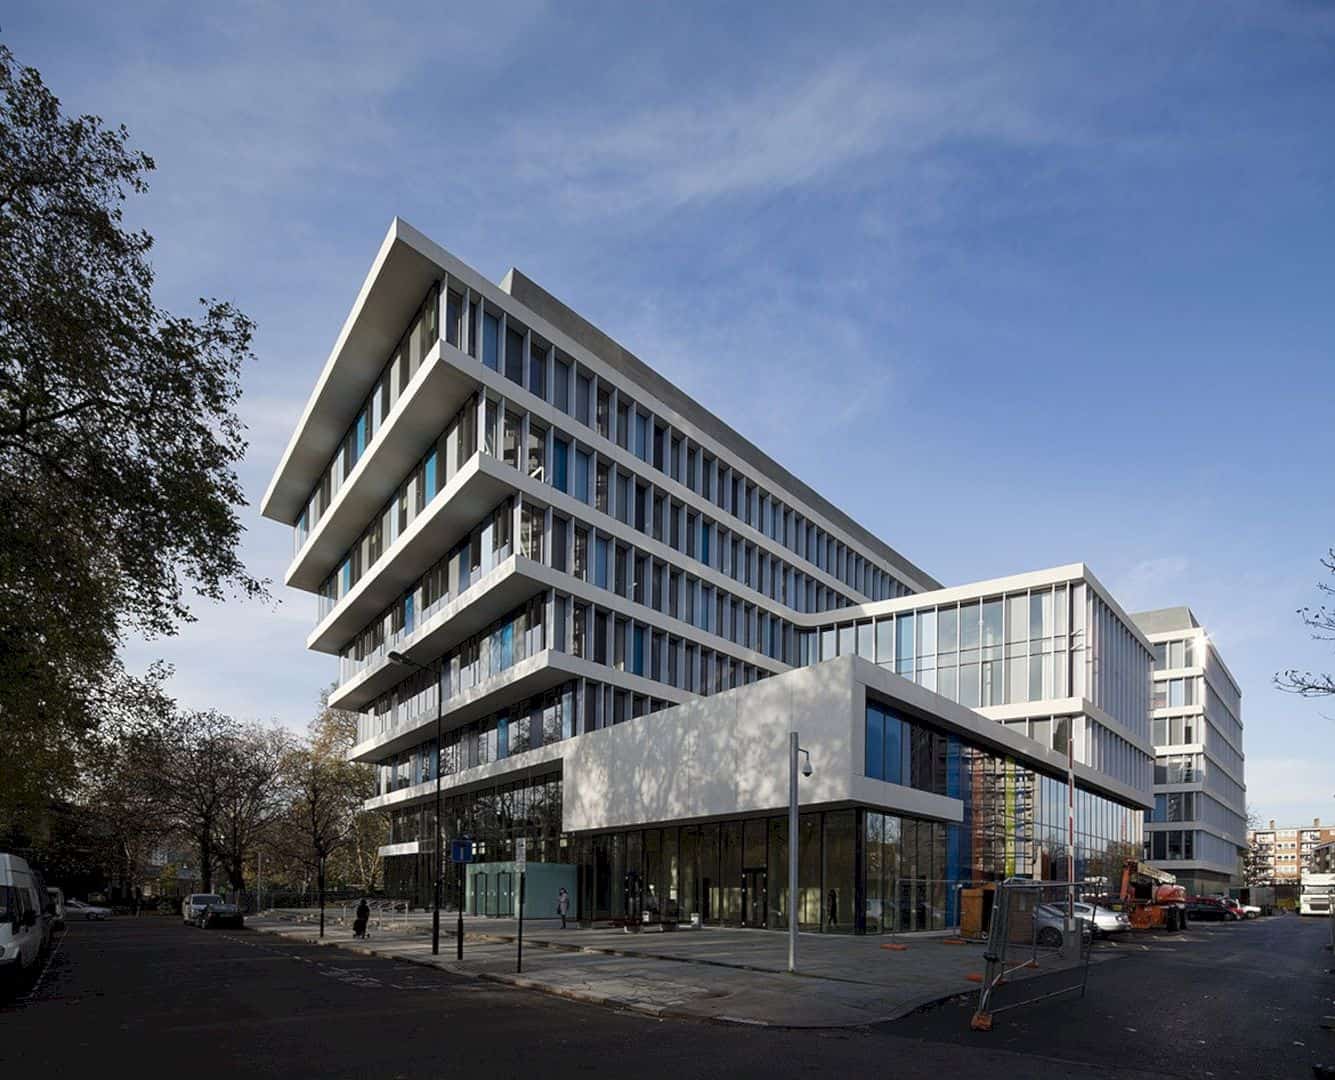 City Of Westminster College The Building To Support The New Ways Of Teaching And Learning 11